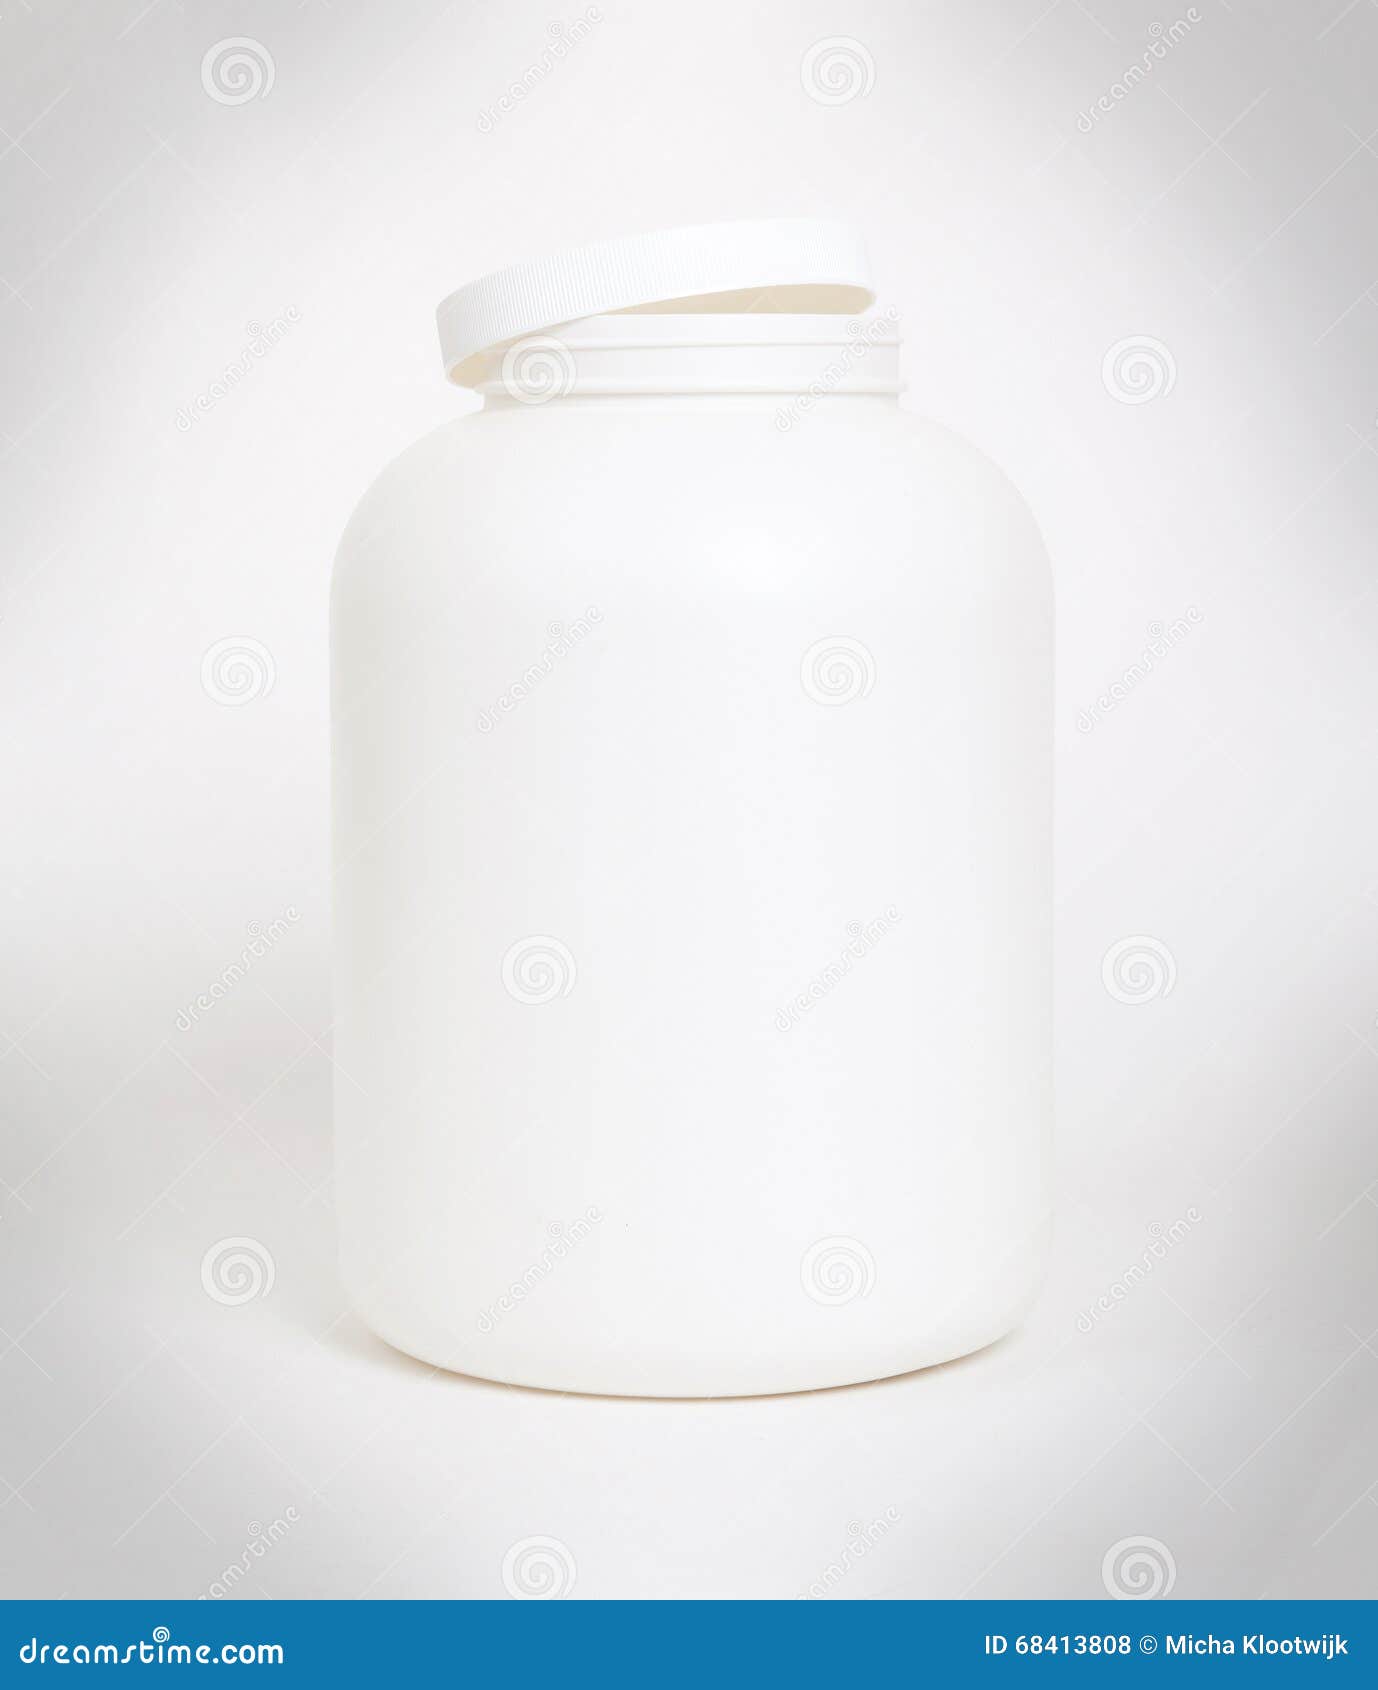 https://thumbs.dreamstime.com/z/empty-protein-powder-container-isolated-white-68413808.jpg